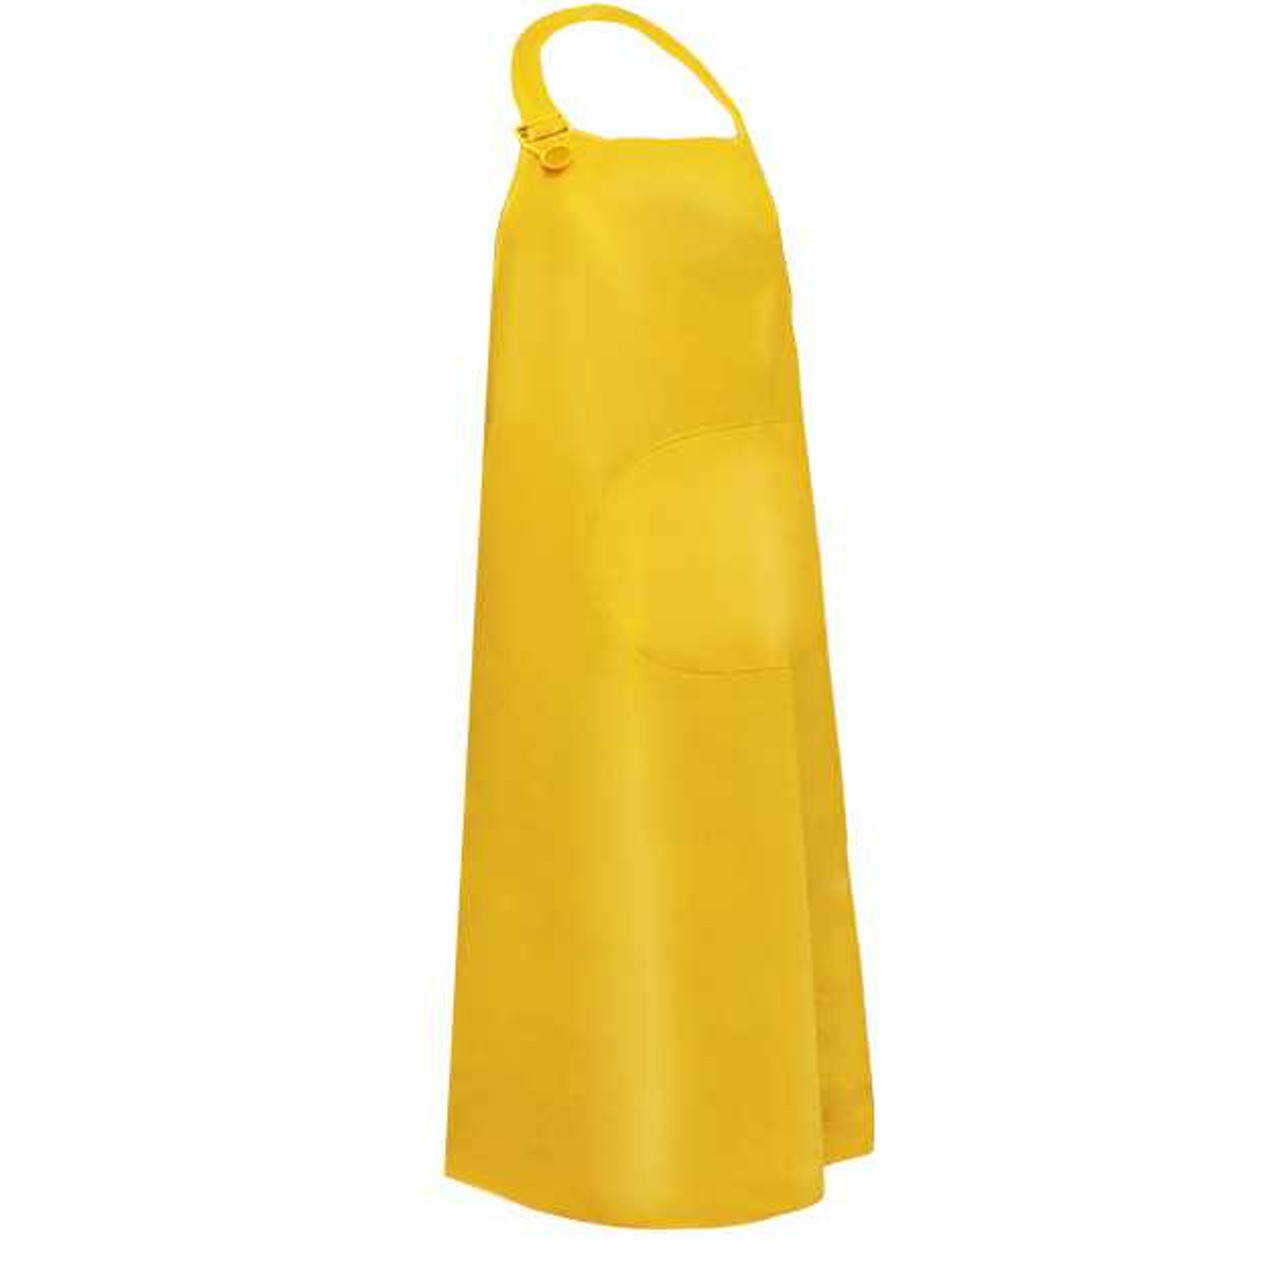 CoverMe™ PVC Apron - 14 mil, Available in Blue or Yellow (24 aprons / case)